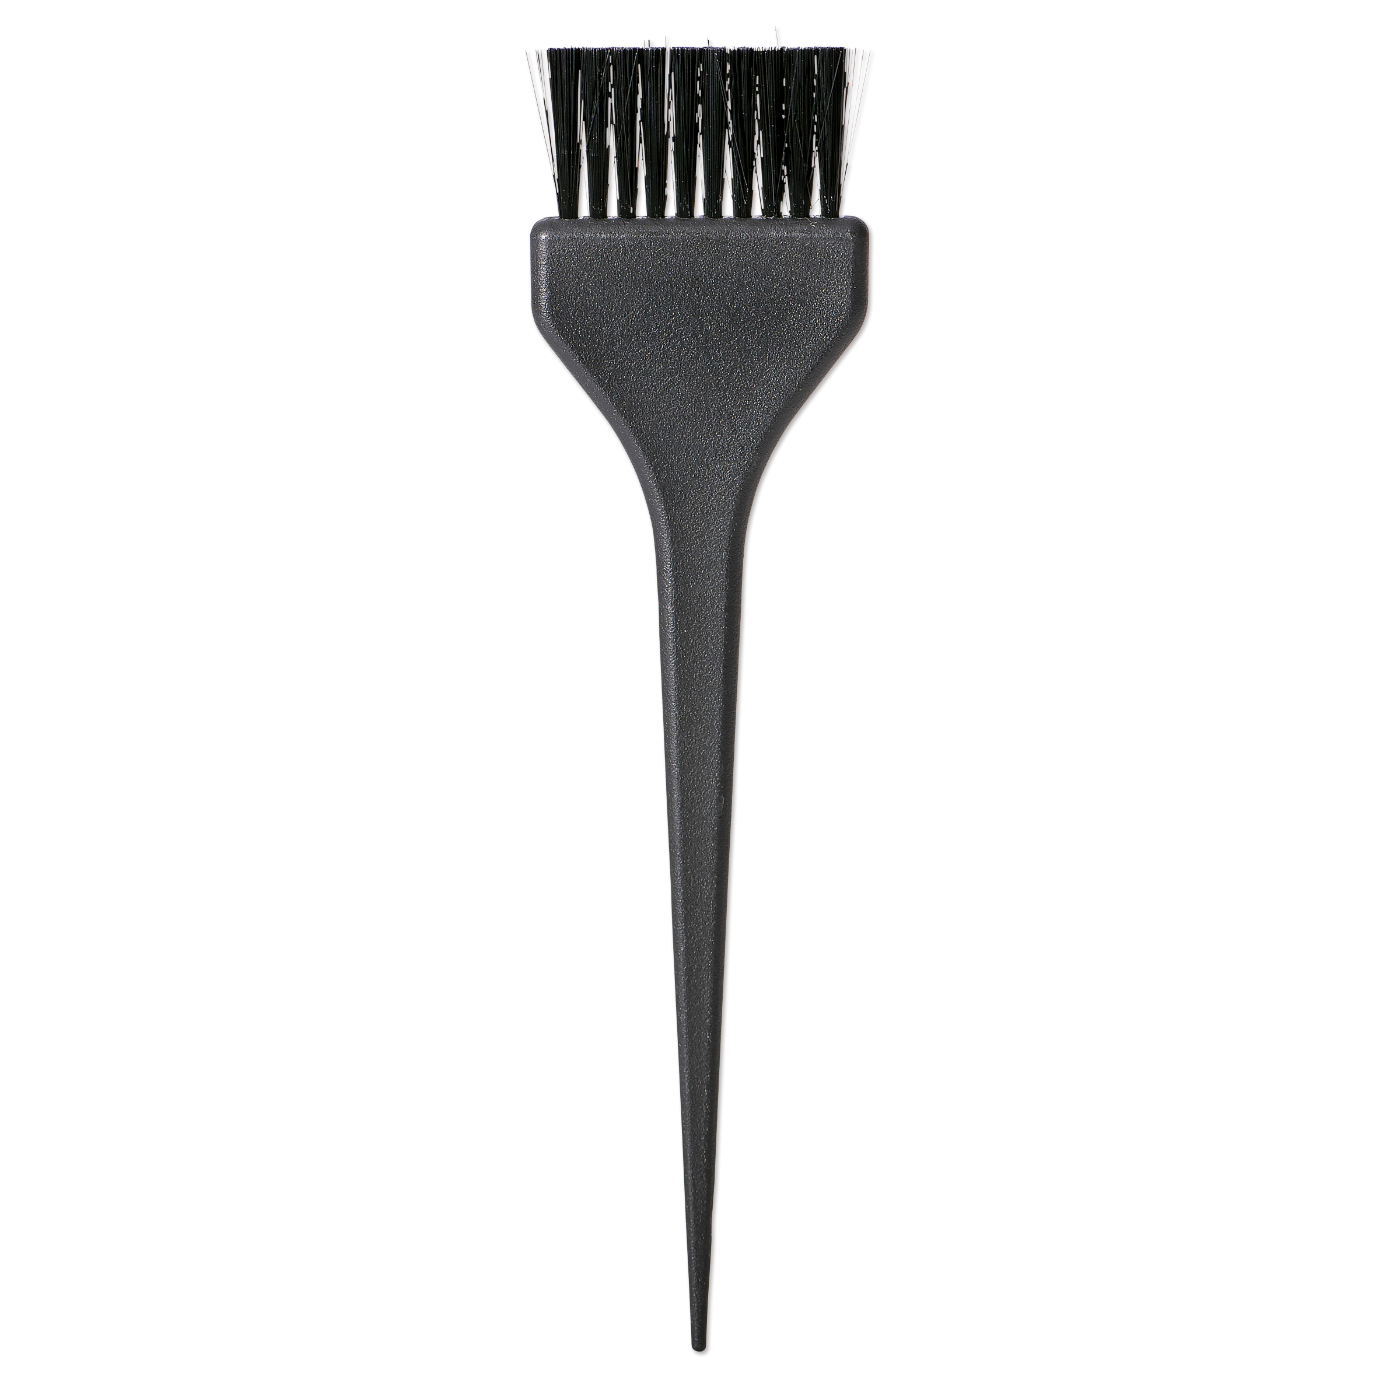 Hair Color/Highlighting Brush - 2" Wide